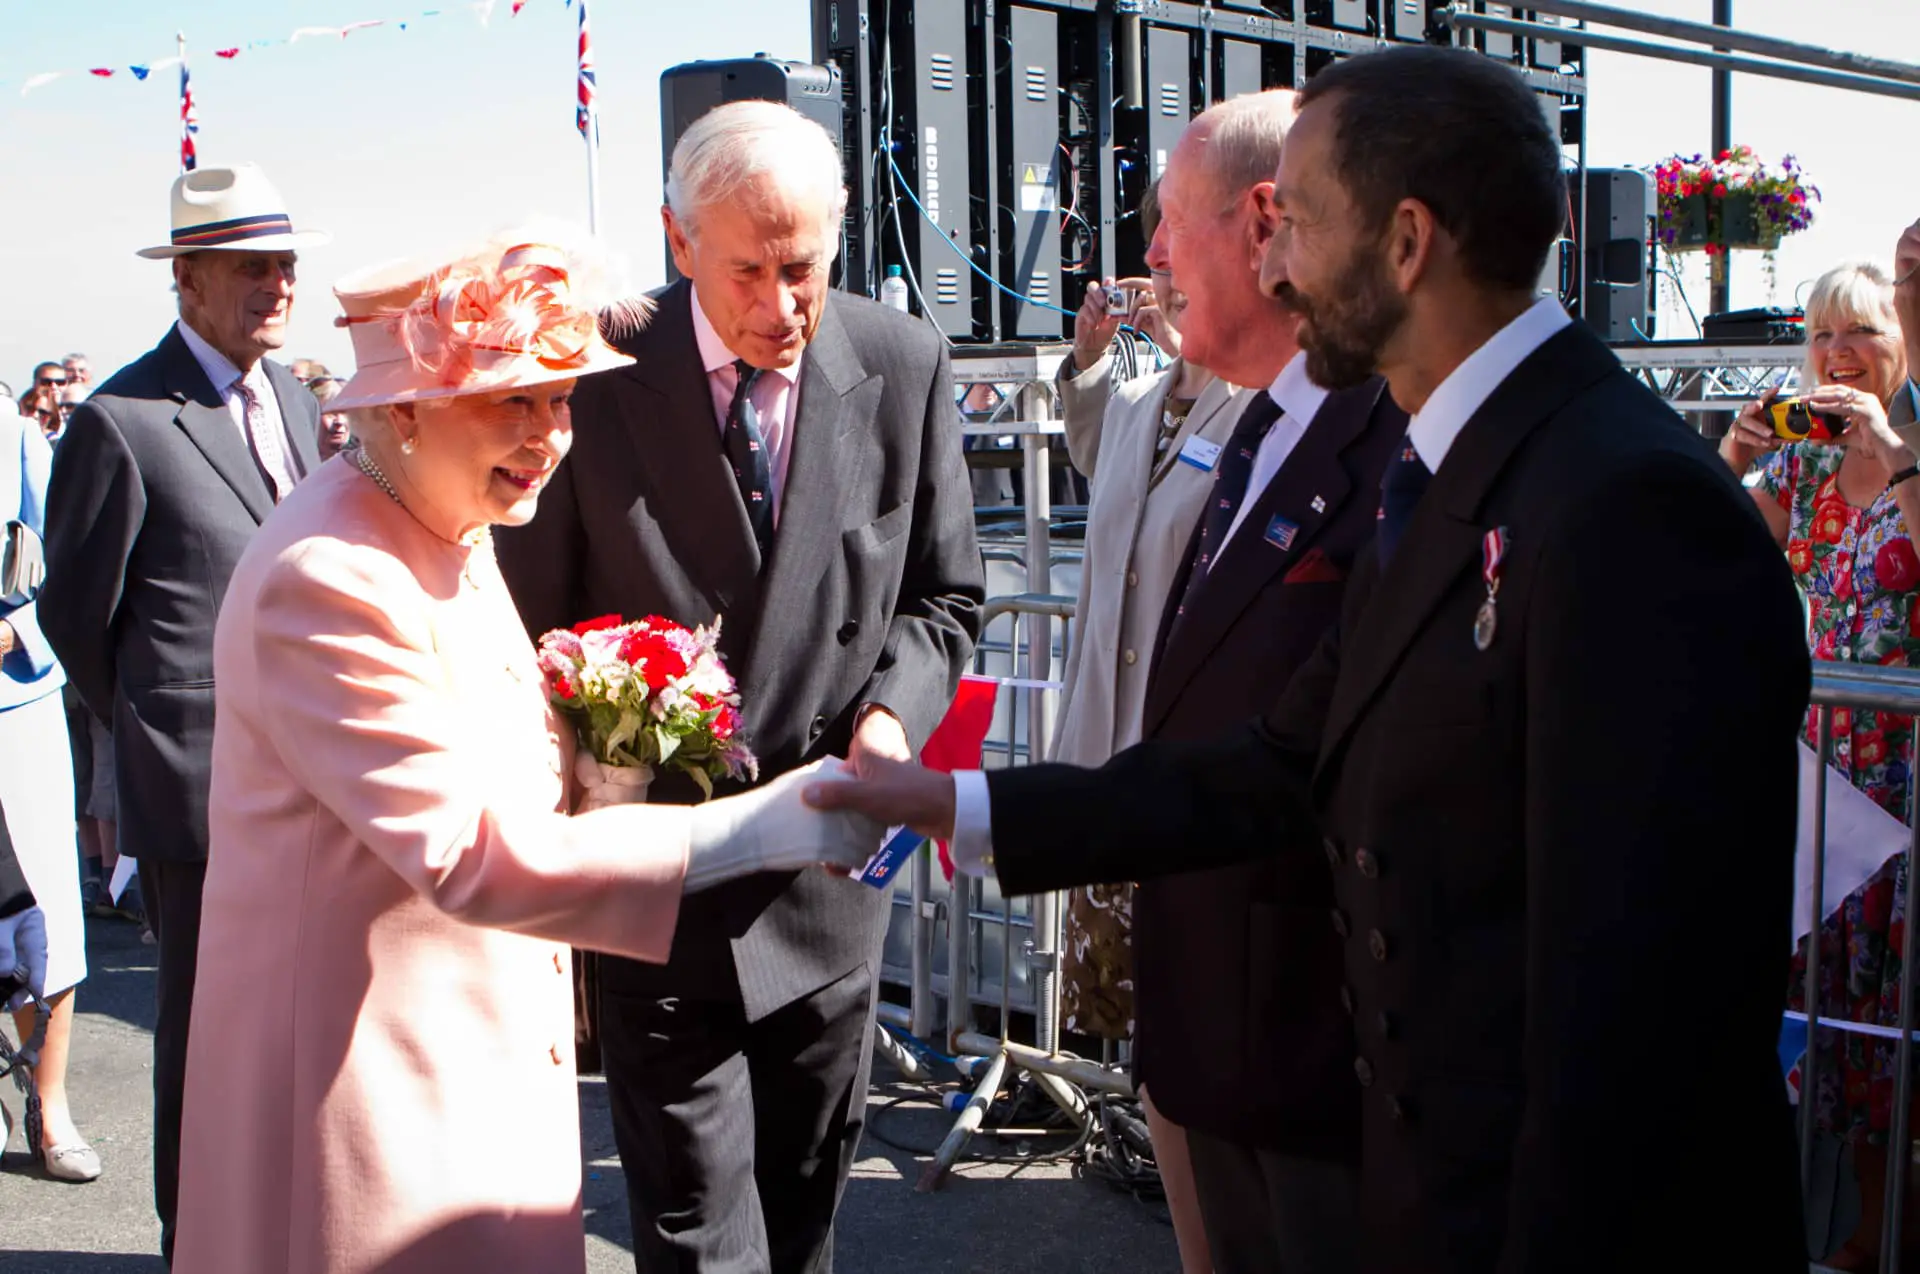 Her Majesty The Queen at the opening of Cowes Lifeboat Station in 2012